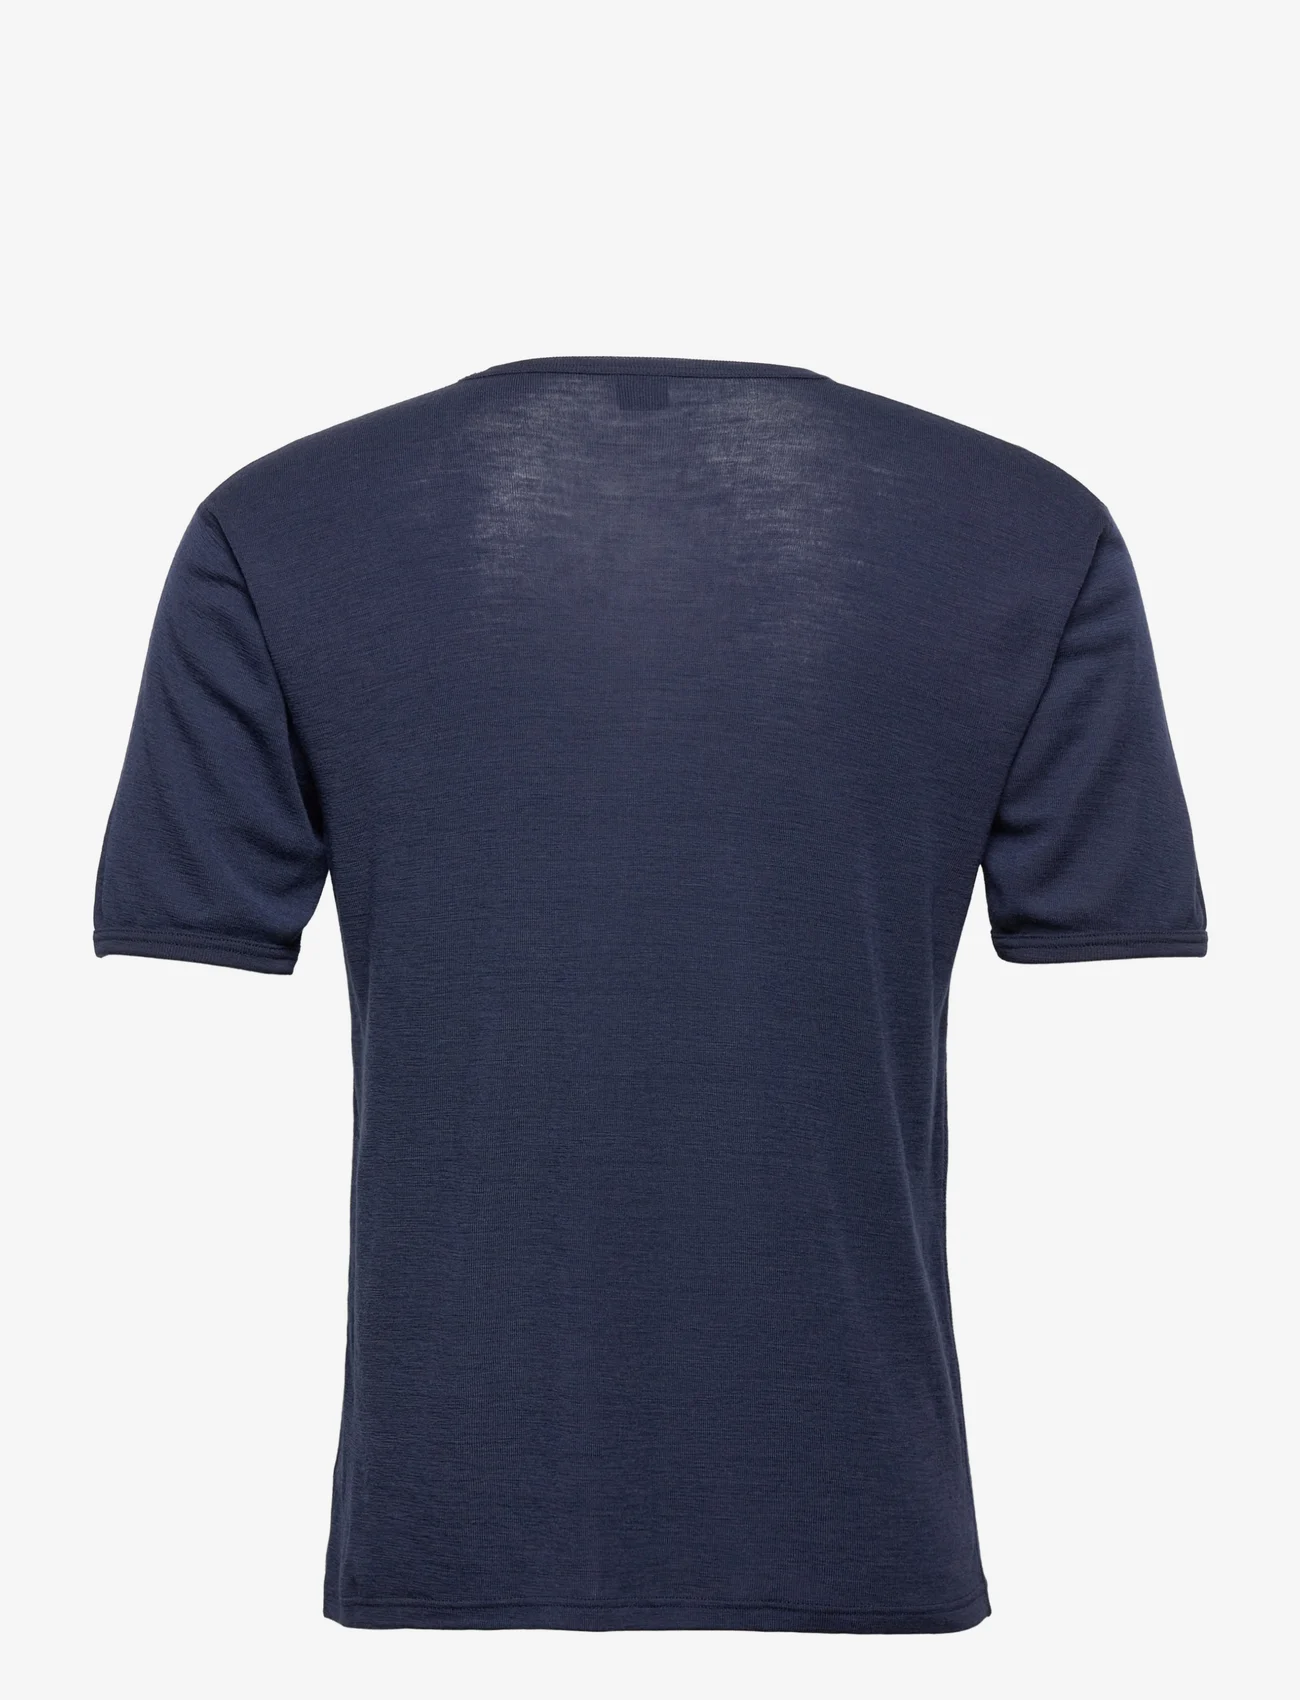 Dovre - DOVRE wool t-shirt - nordic style - navy - 1